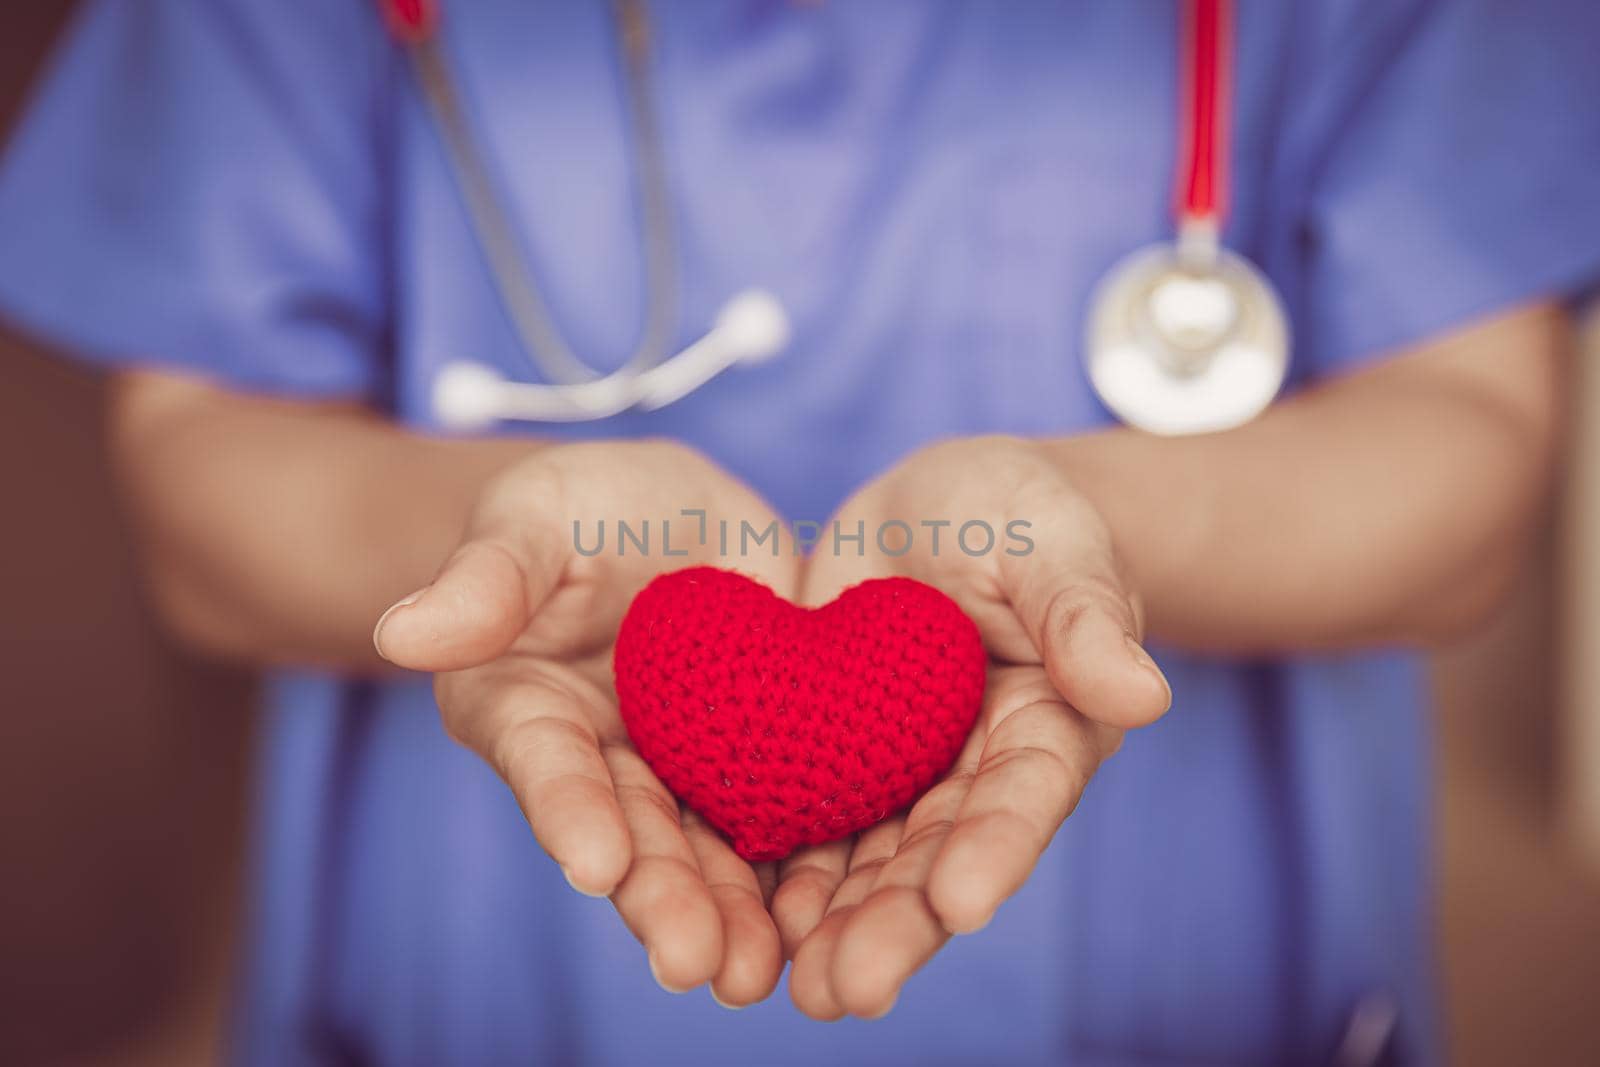 Doctor Nurse hand giving red heart for help care or blood donation healthcare share love to fight disease concept. by qualitystocks